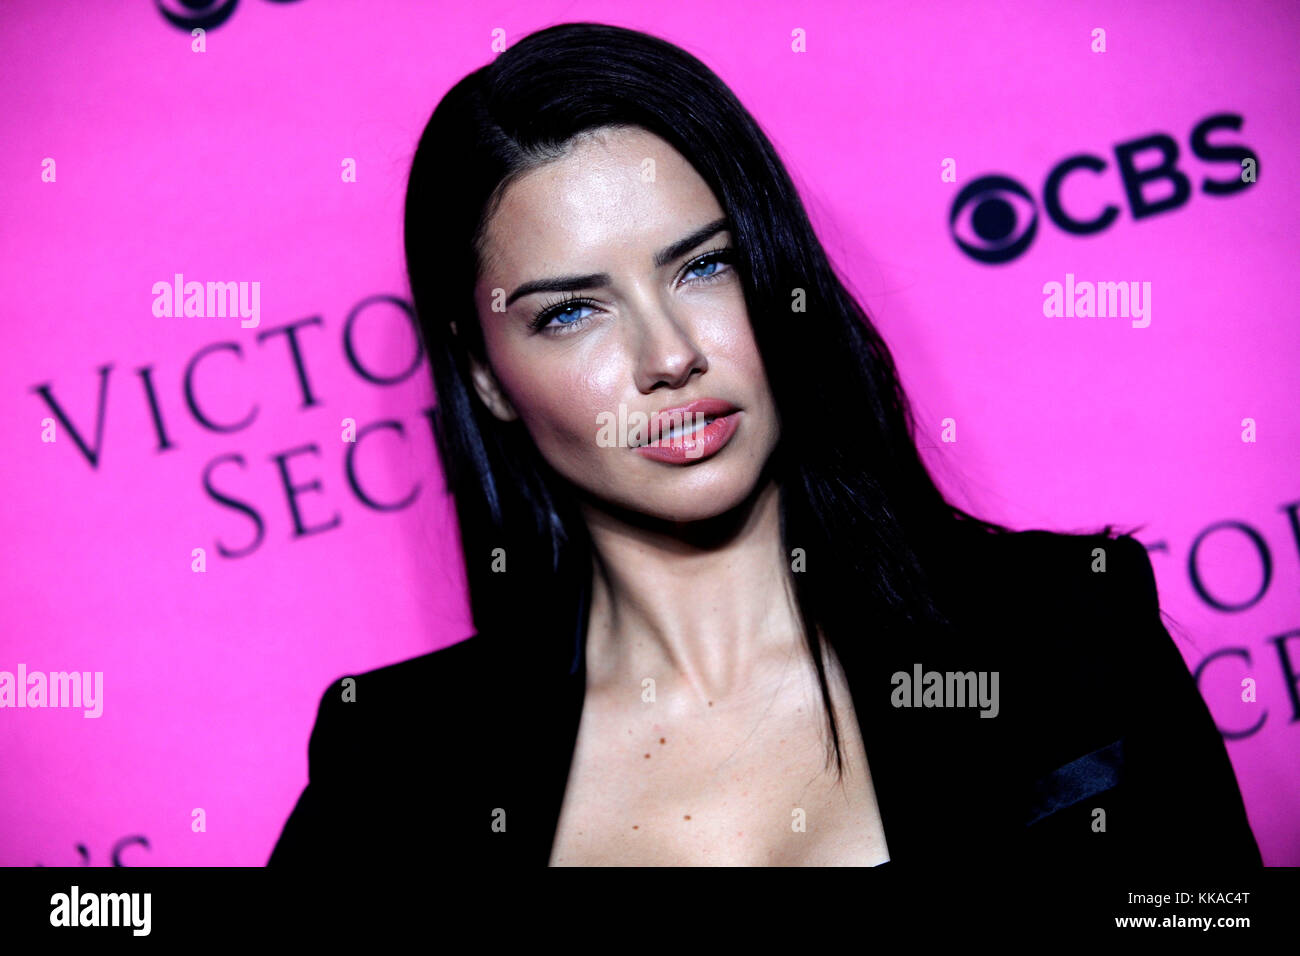 New York, USA. 28th Nov, 2017. Adriana Lima attends the 2017 Victoria's Secret Fashion Show viewing party pink carpet at Spring Studios on November 28, 2017 in New York City. Credit: Geisler-Fotopress/Alamy Live News Stock Photo